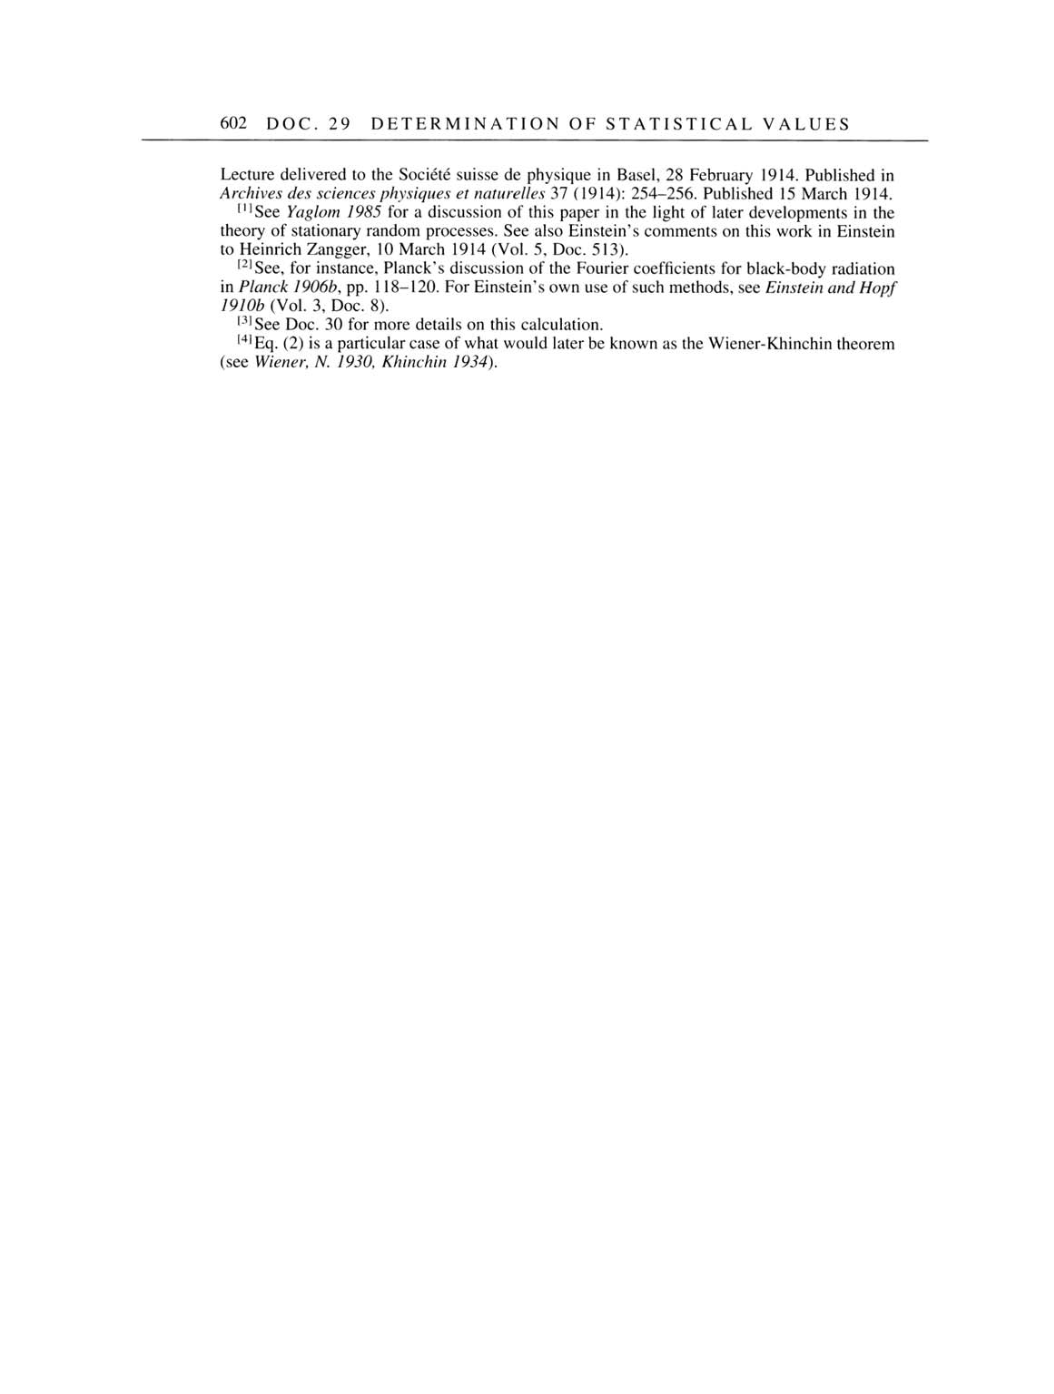 Volume 4: The Swiss Years: Writings 1912-1914 page 602